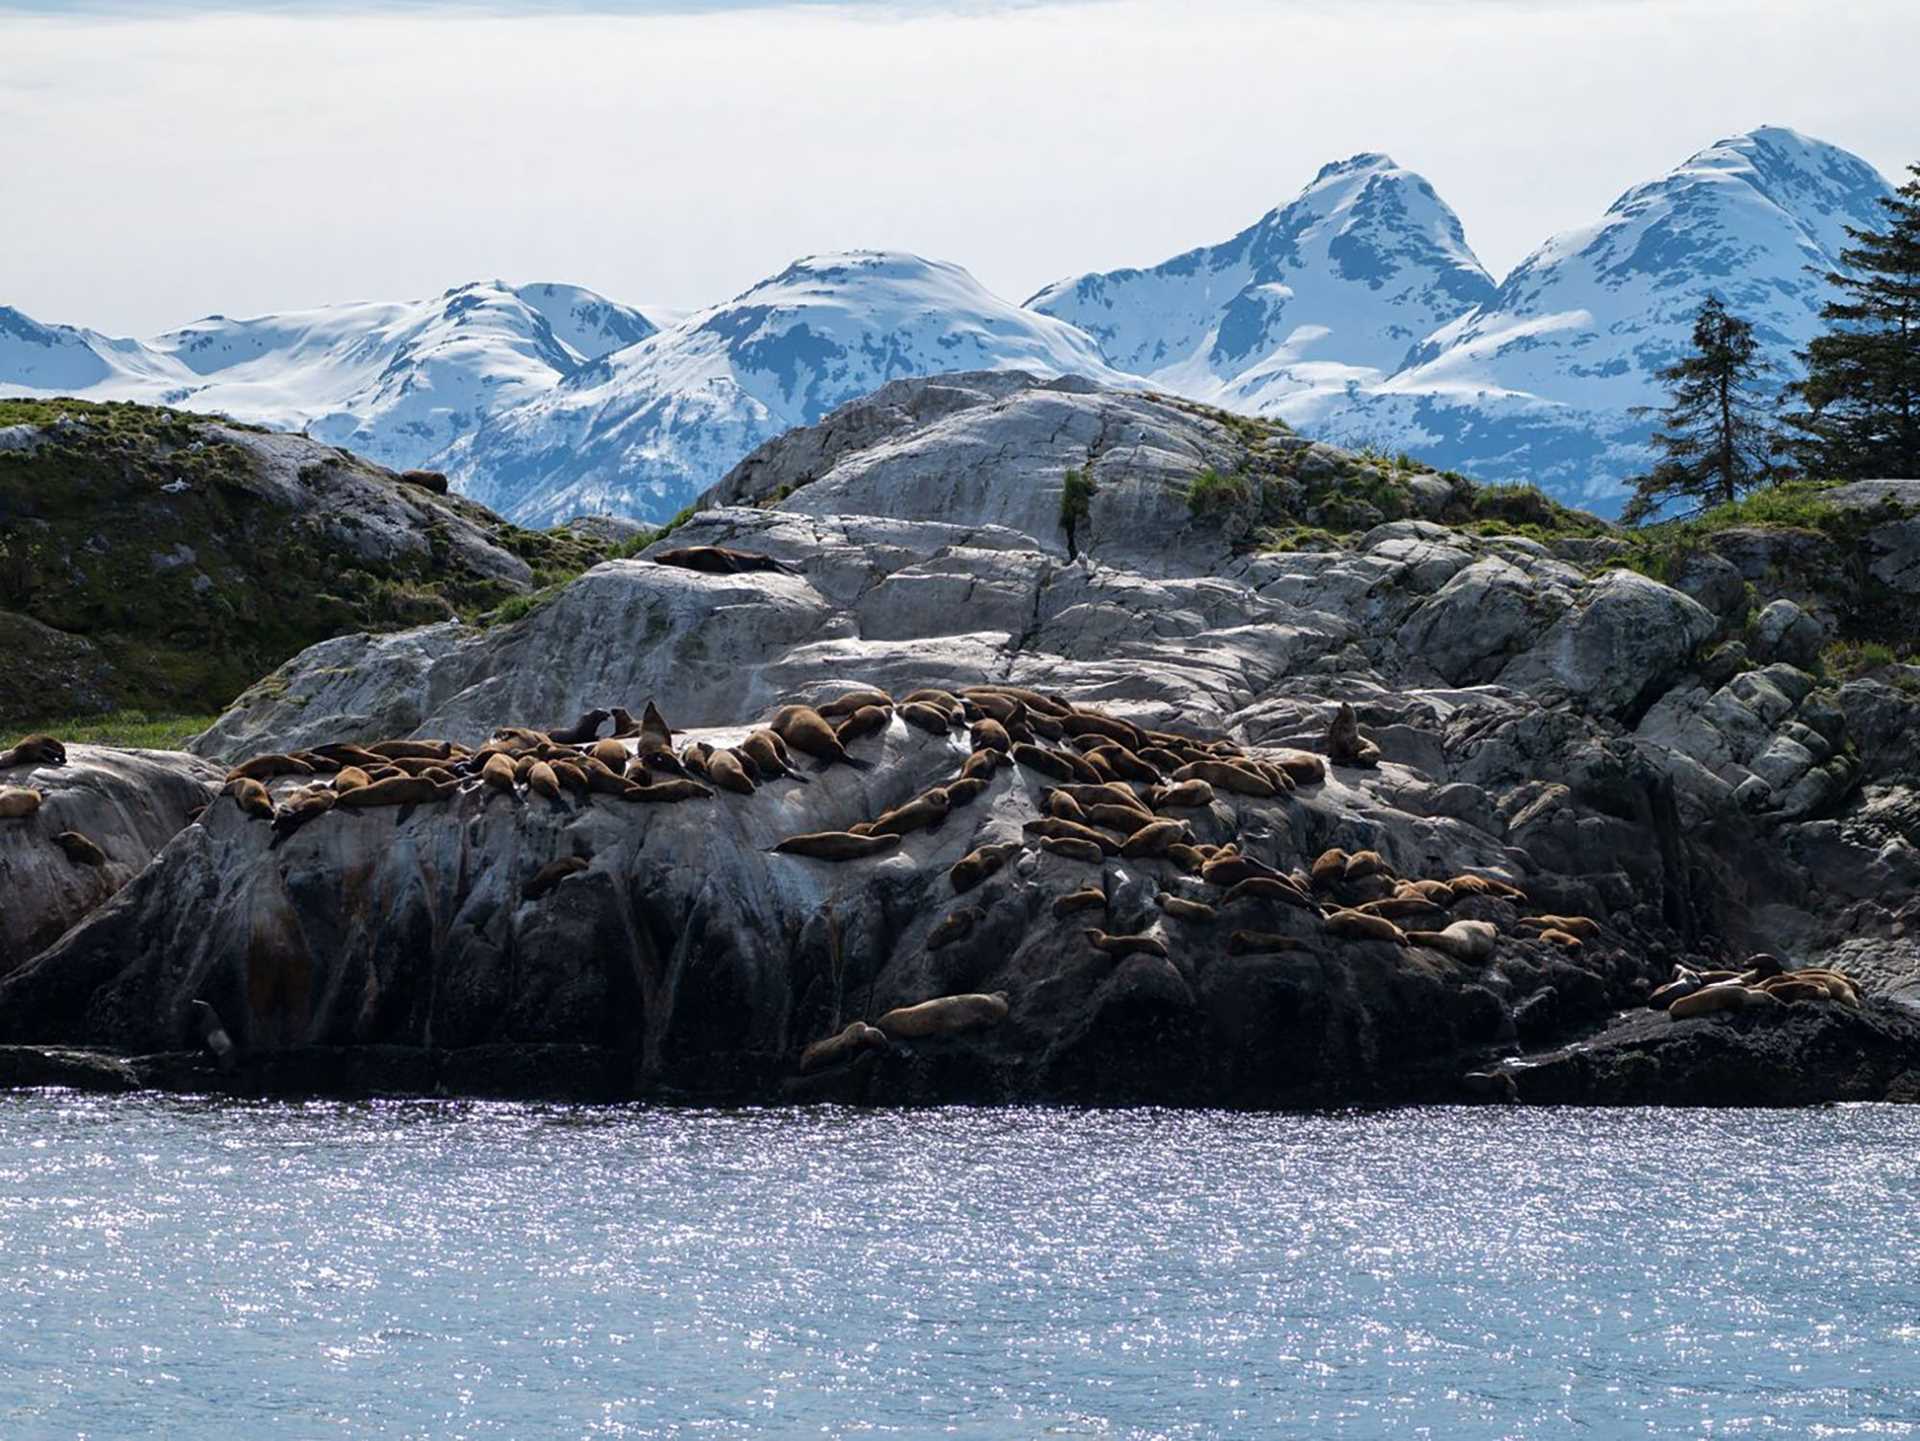 sea lions on a rock with mountains in the background